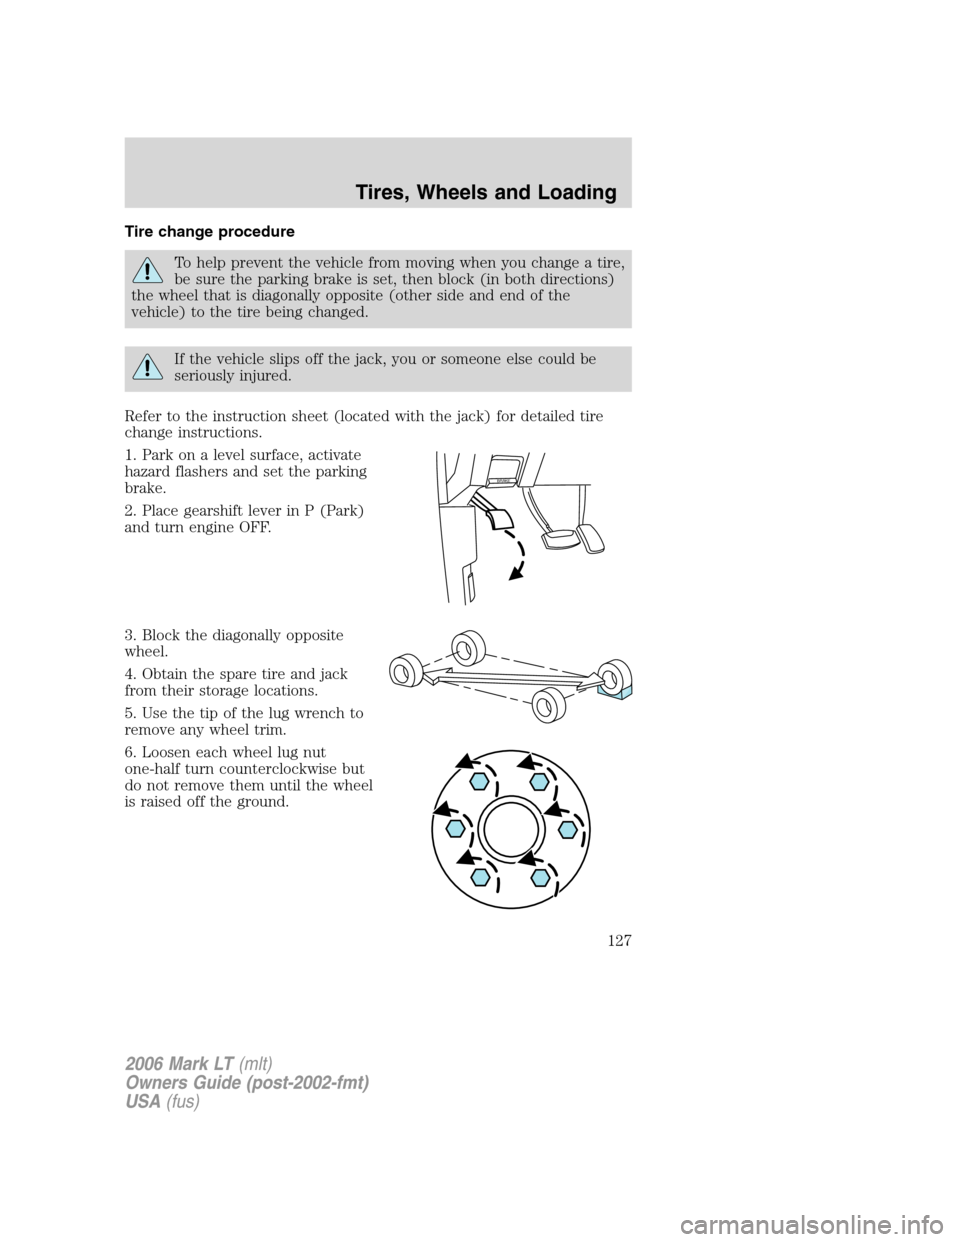 LINCOLN MARK LT 2006  Owners Manual Tire change procedure
To help prevent the vehicle from moving when you change a tire,
be sure the parking brake is set, then block (in both directions)
the wheel that is diagonally opposite (other sid